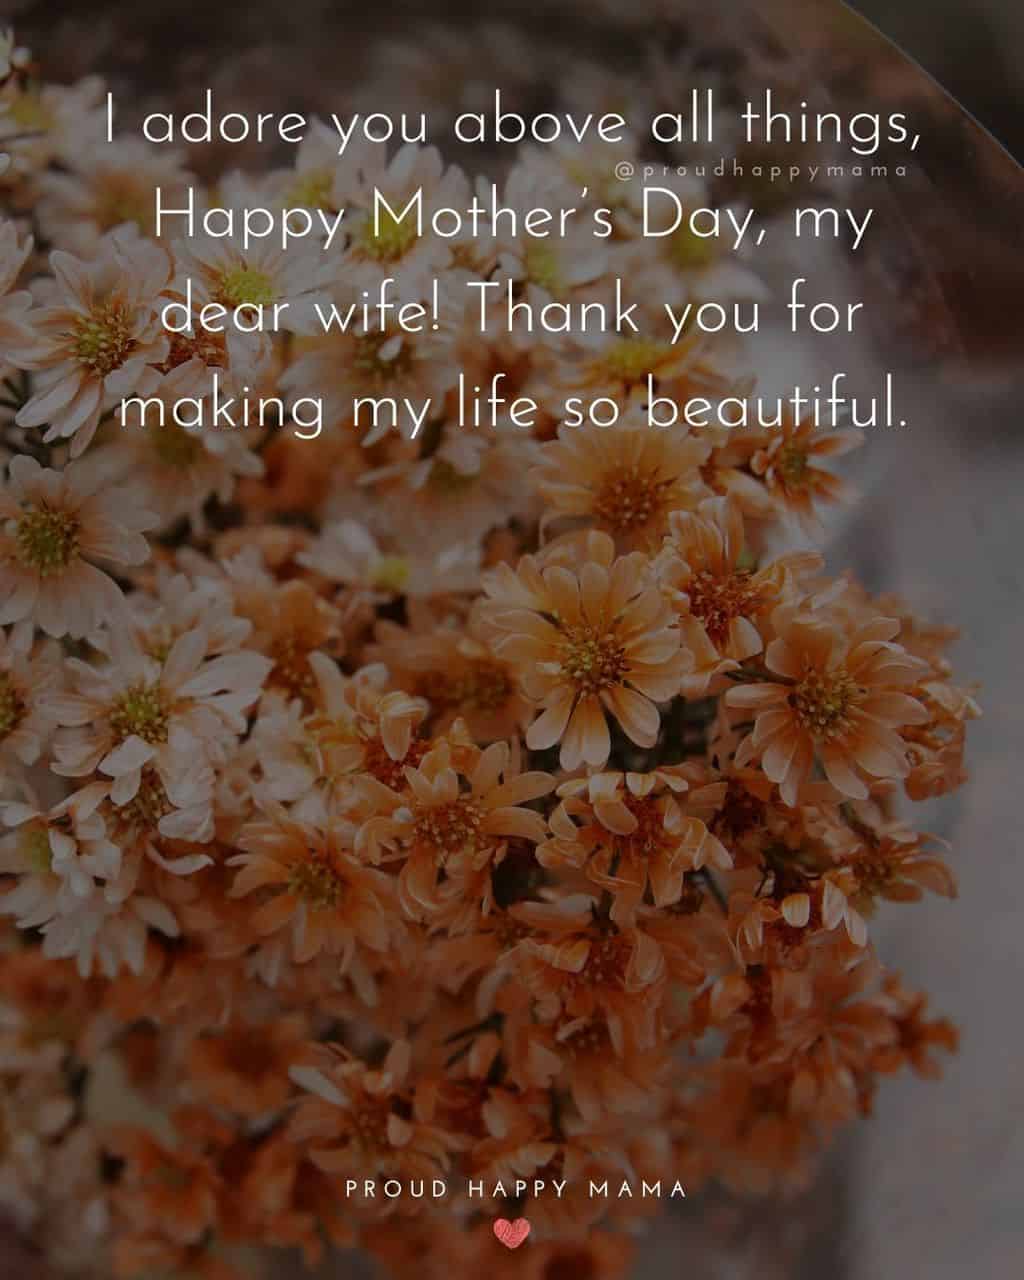 Happy Mothers Day Quotes For Wife - I adore you above all things, Happy Mother’s Day, my dear wife! Thank you for making